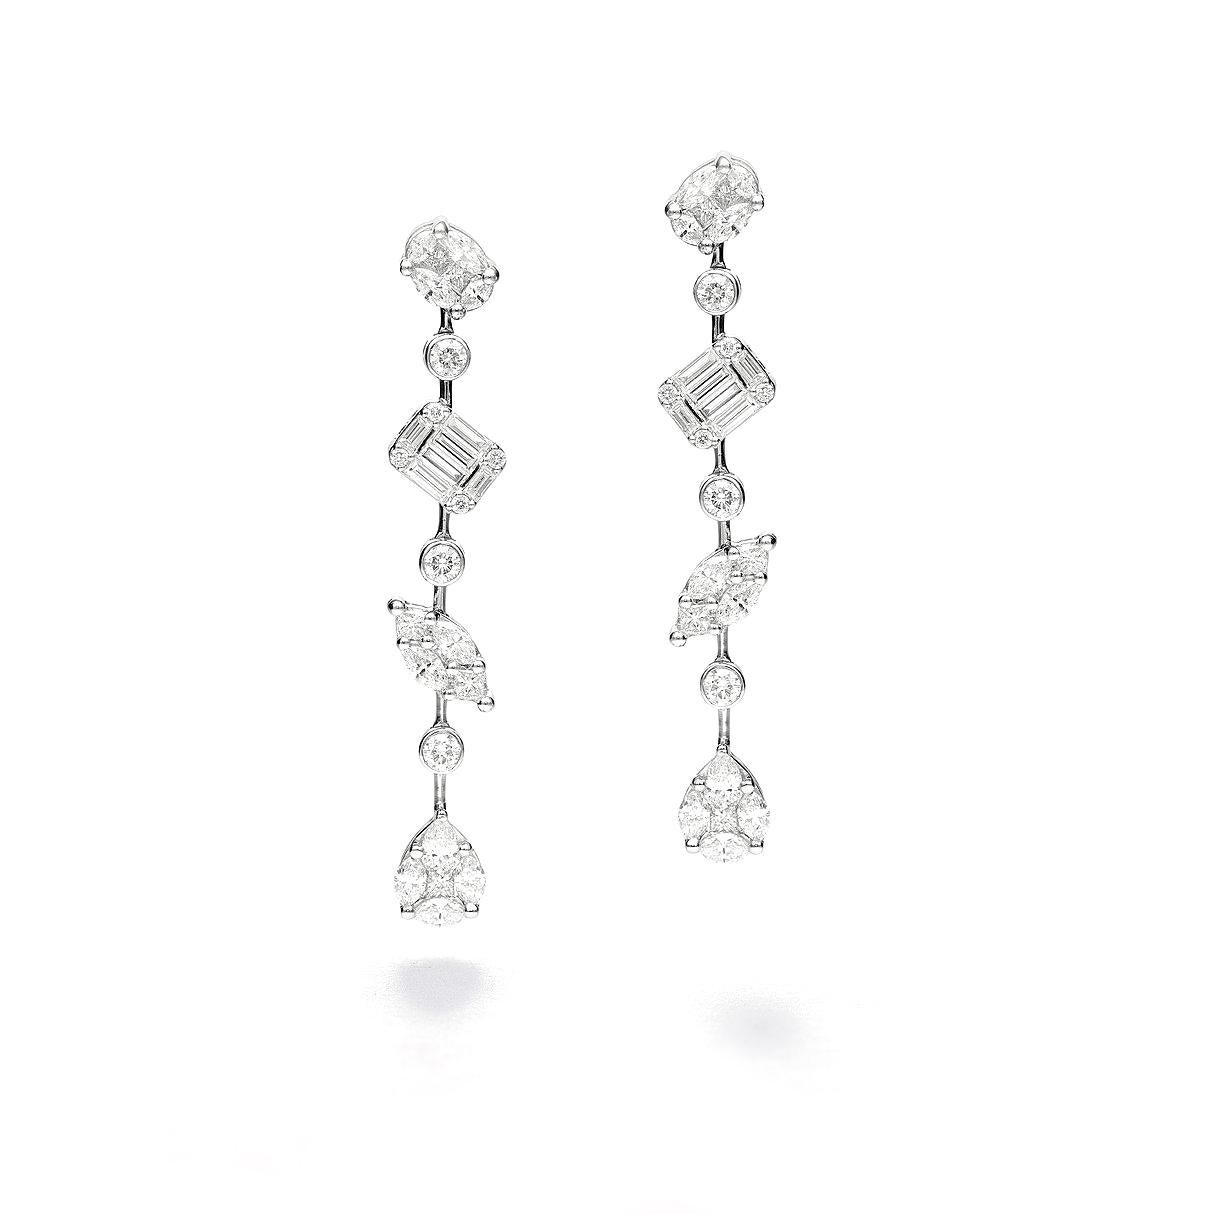 Earrings in 18kt white gold set with 42 princess, marquise baguette and pear-shaped cut diamonds 3.05 cts and 14 diamonds 0.67 cts        